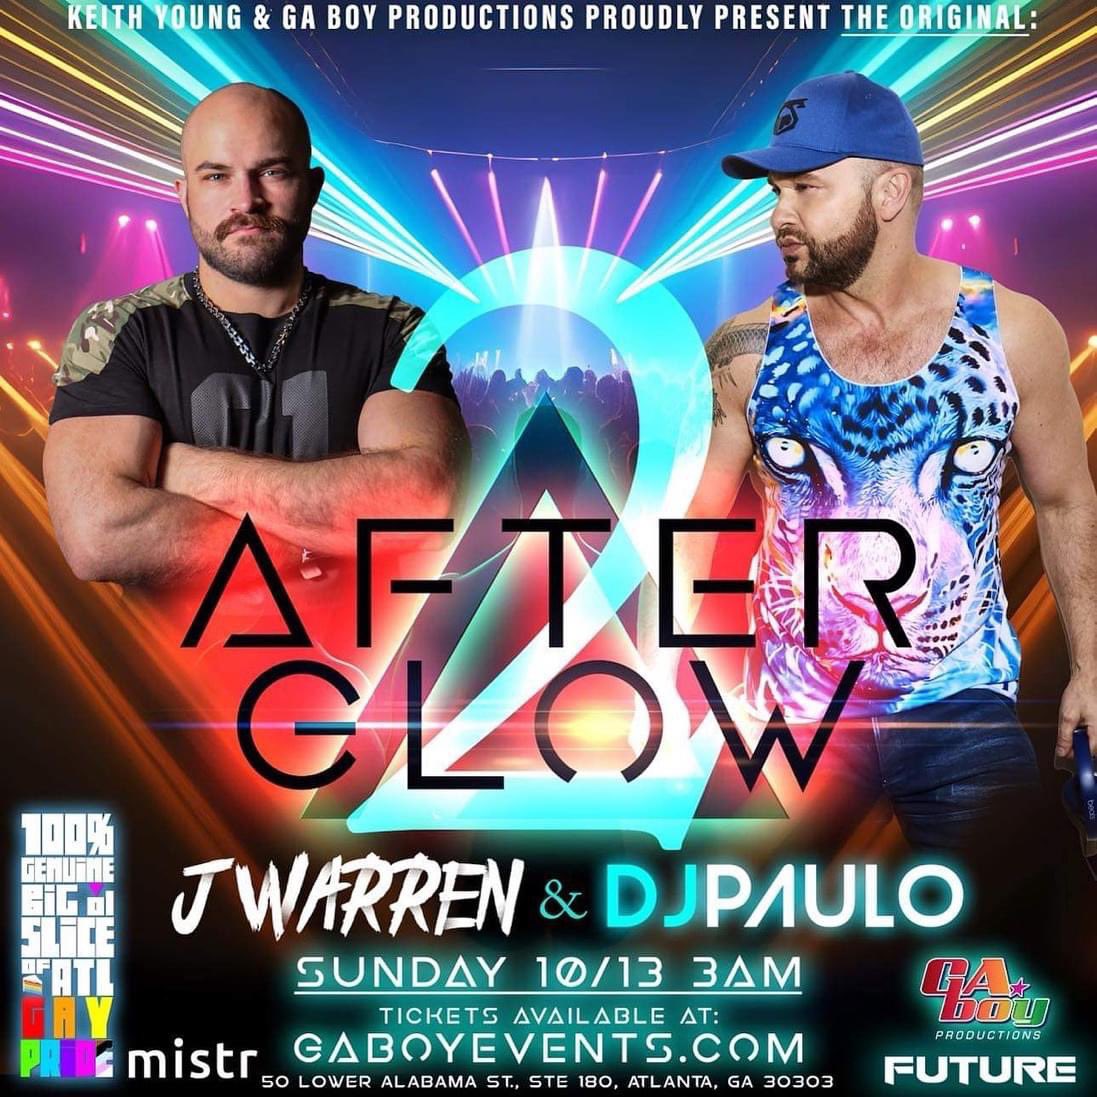 My Pride afterhours events in Atlanta are legendary …. This year we do it again ! 🥰🍑